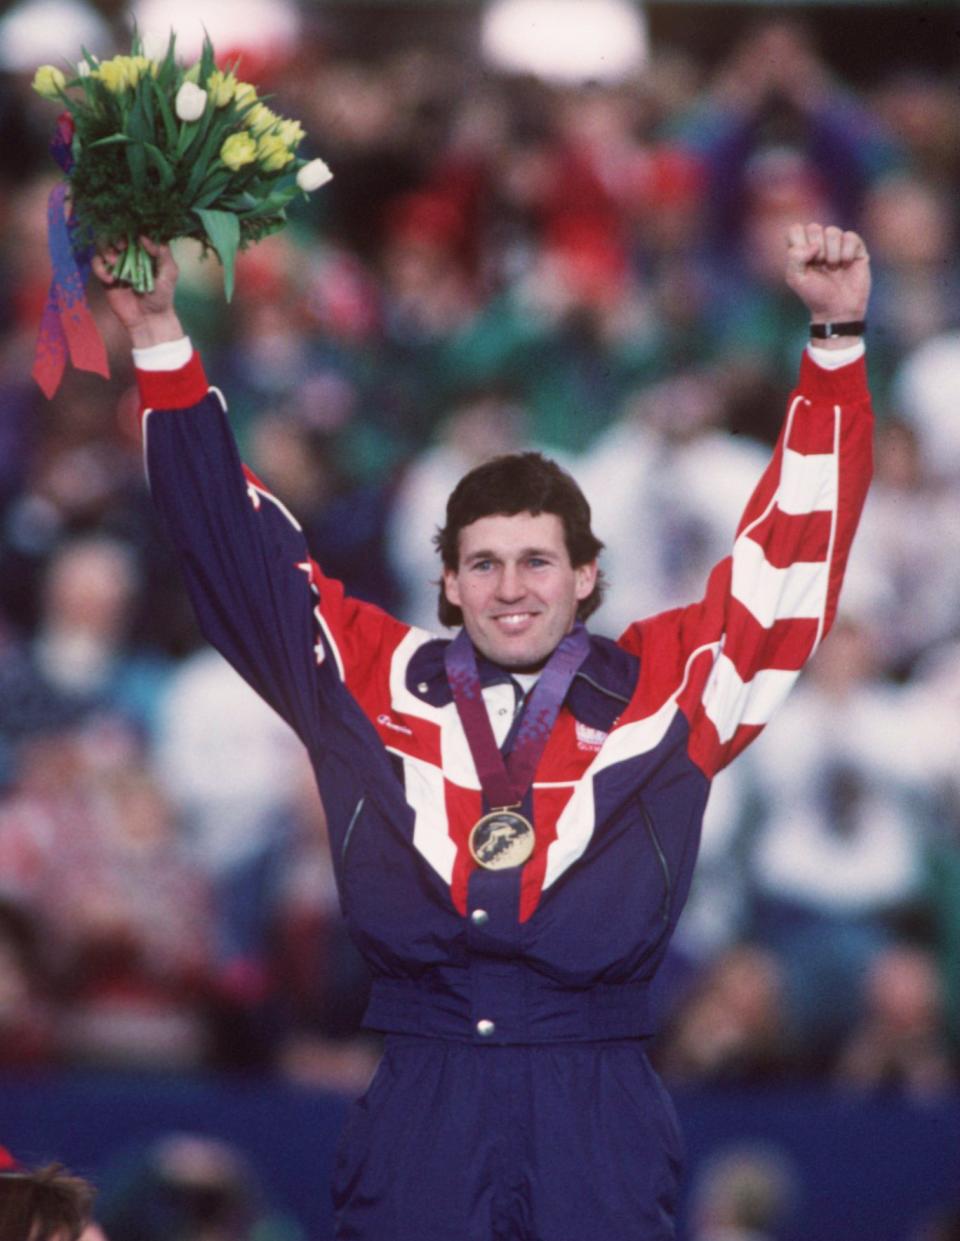 <p>It took speed skater Dan Jansen 10 years to win his first gold medal. Just hours after his sister passed away from Leukemia, Jansen competed in the 1988 Games and fumbled. He lost again in the 1992 Games, but in a true story of persistence, he won gold in the 1000m in 1994, and used the win to honor his late sister. (AP) </p>